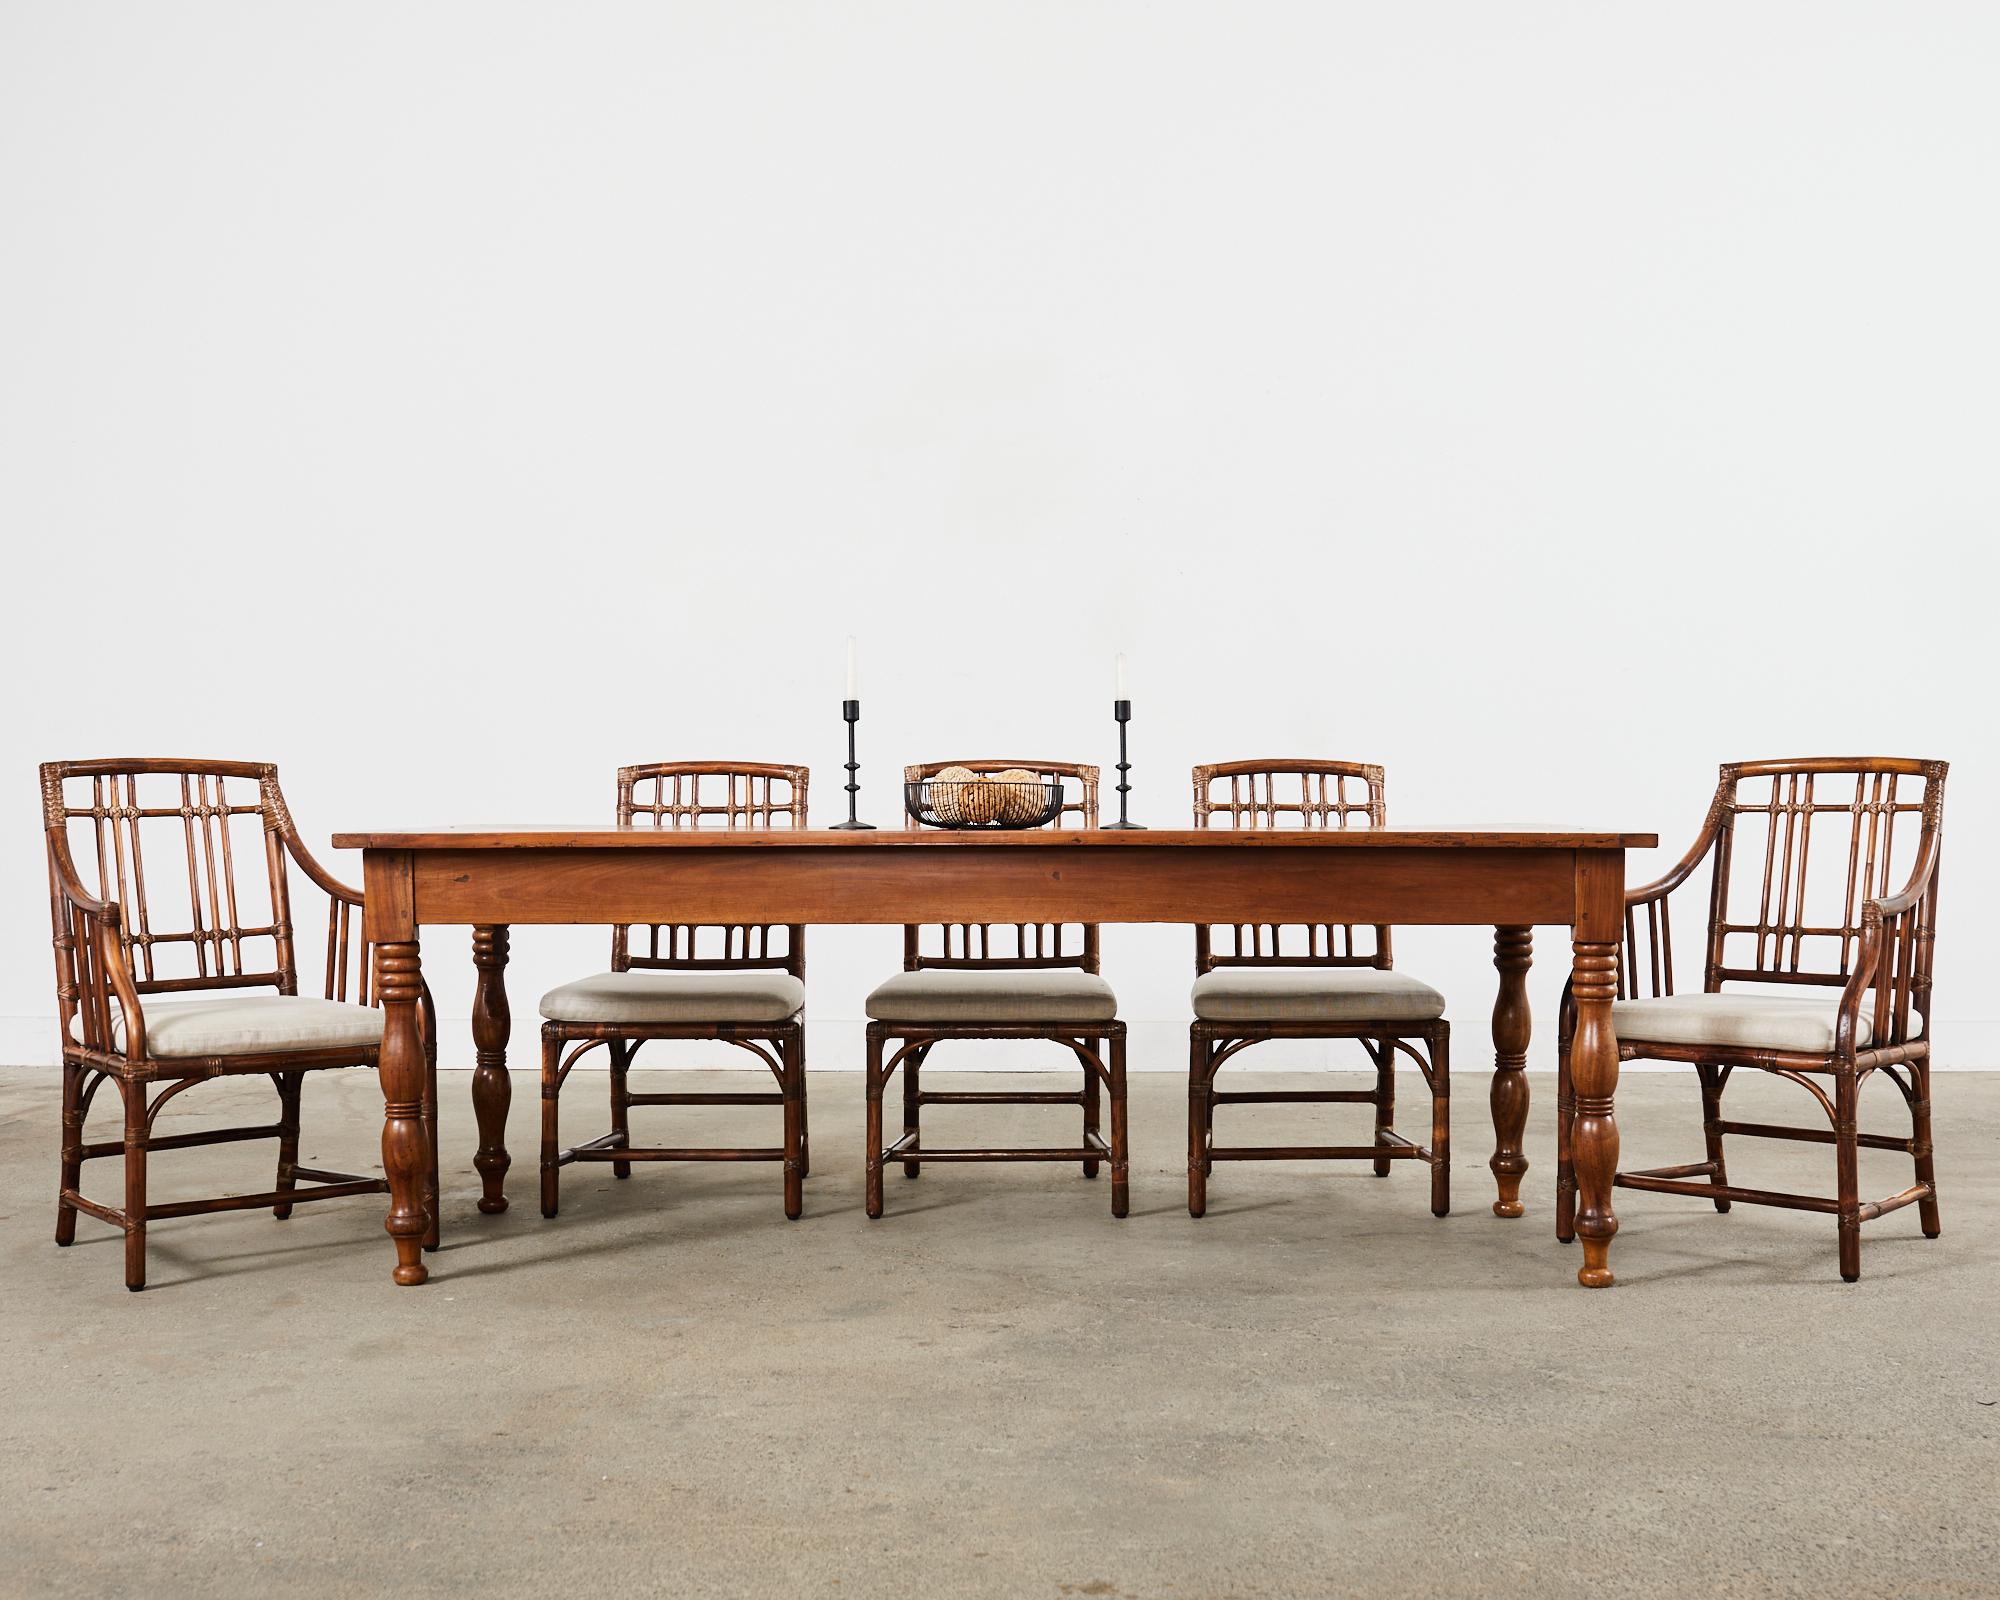 Architectural set of eight rattan dining chairs made in the organic modern style by McGuire. The set consists of six side chairs and two armchairs measuring 22 inches wide. Known as the Balboa chair designed by Elinor McGuire model #MCJSC 151, and